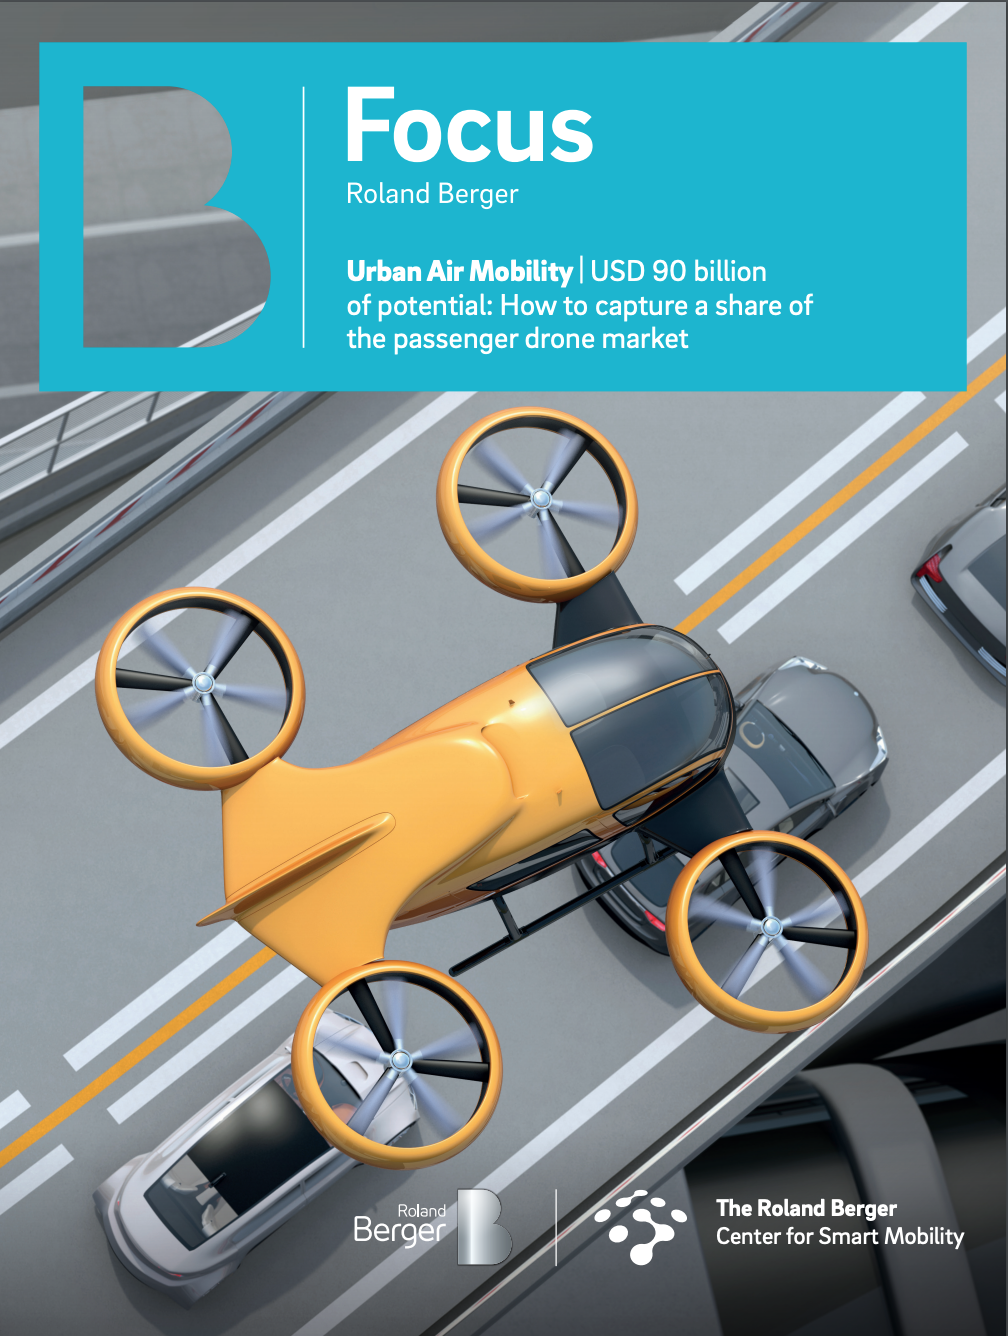 The high-flying industry: Urban Air Mobility takes off | Roland Berger